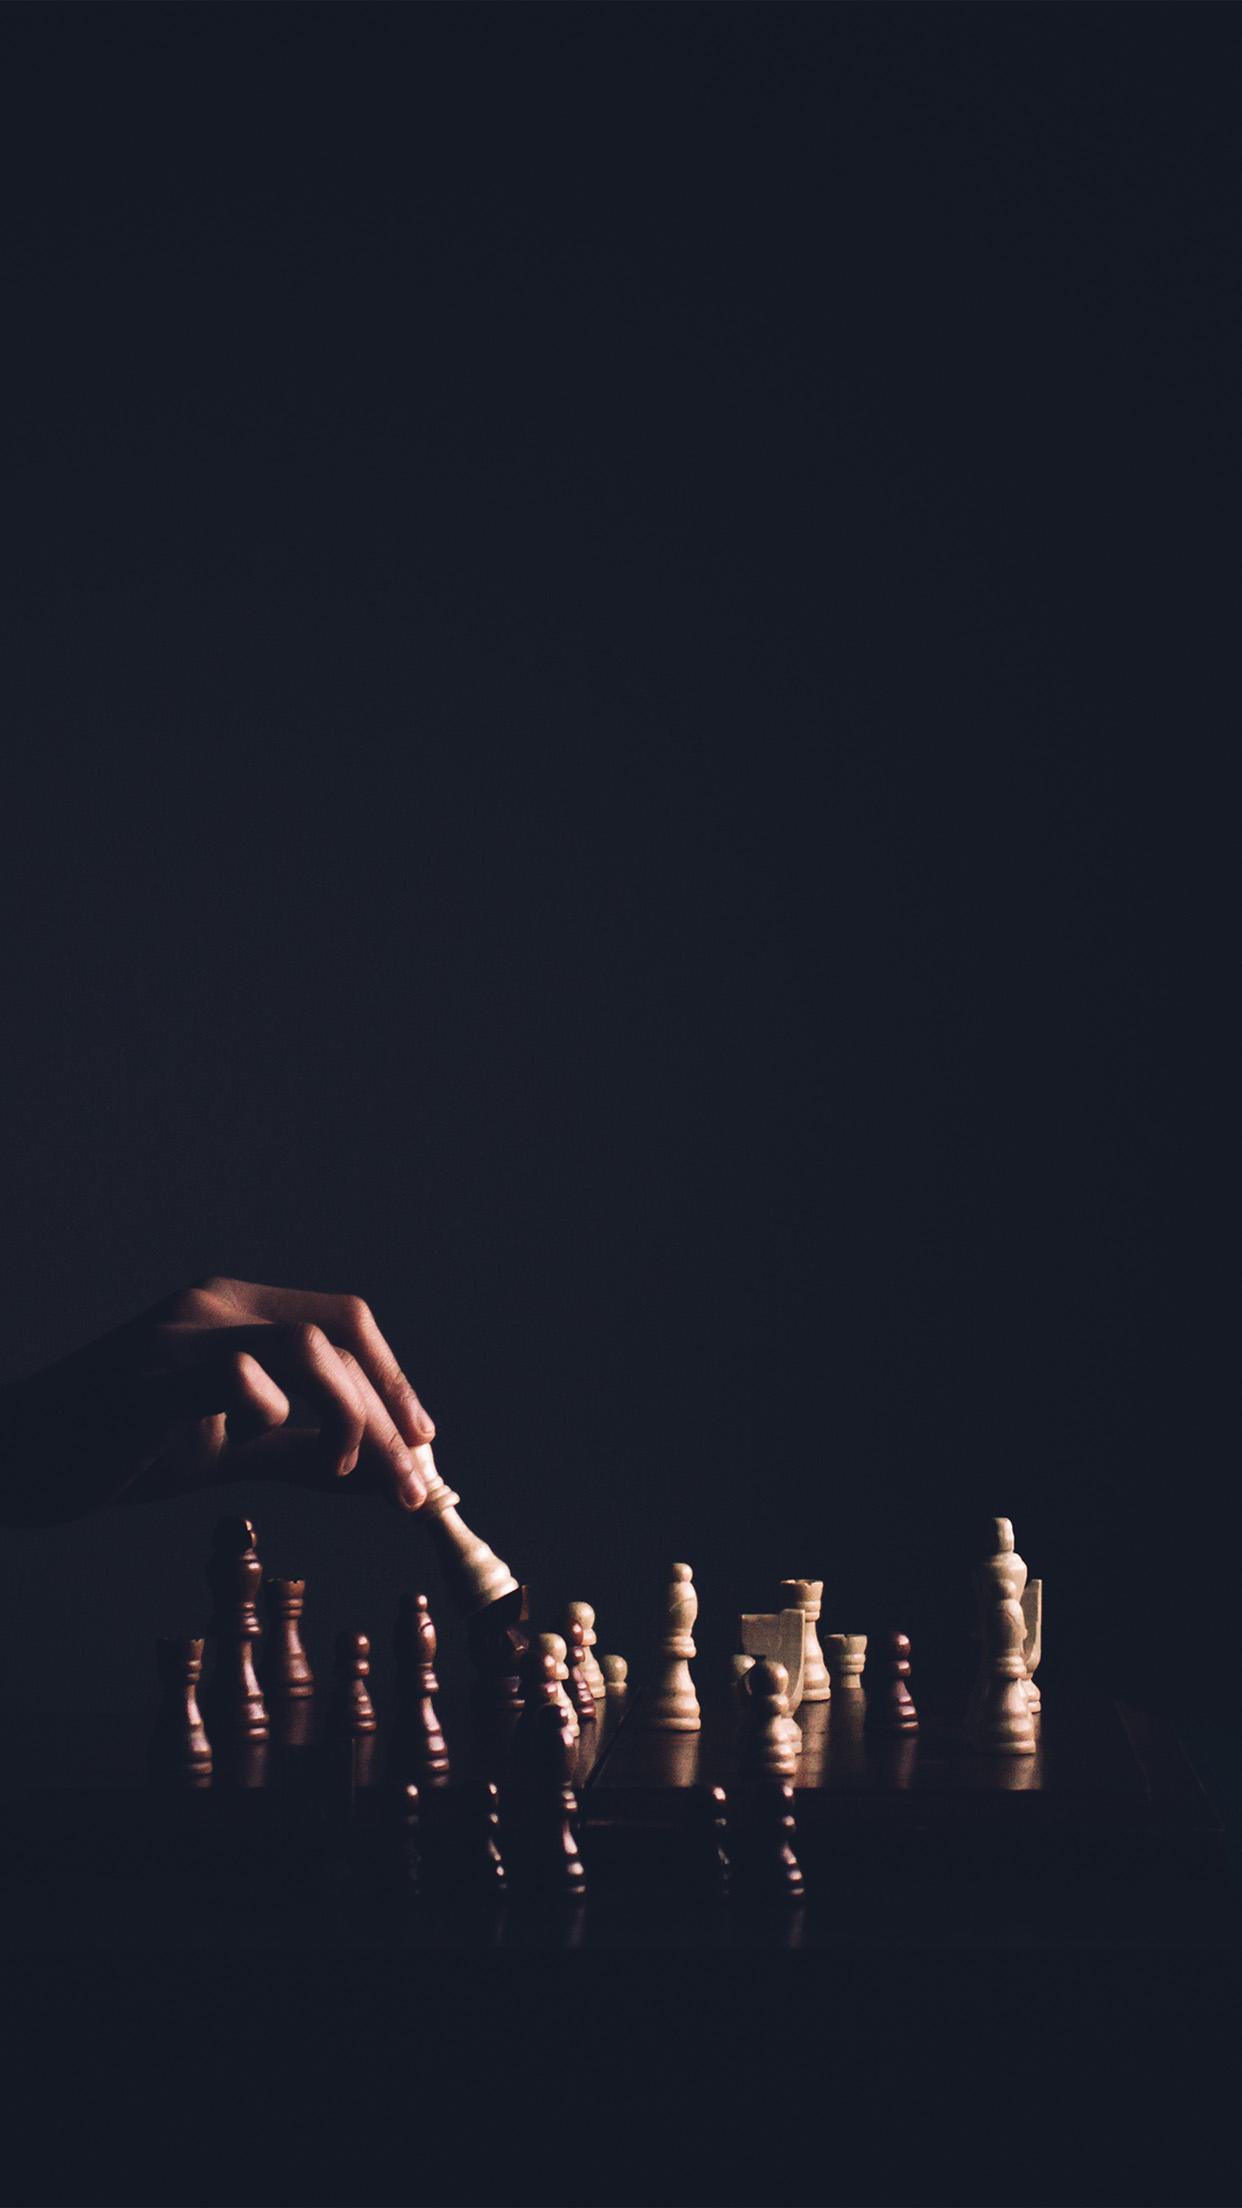 Chess Game iPhone Wallpaper HD - iPhone Wallpapers